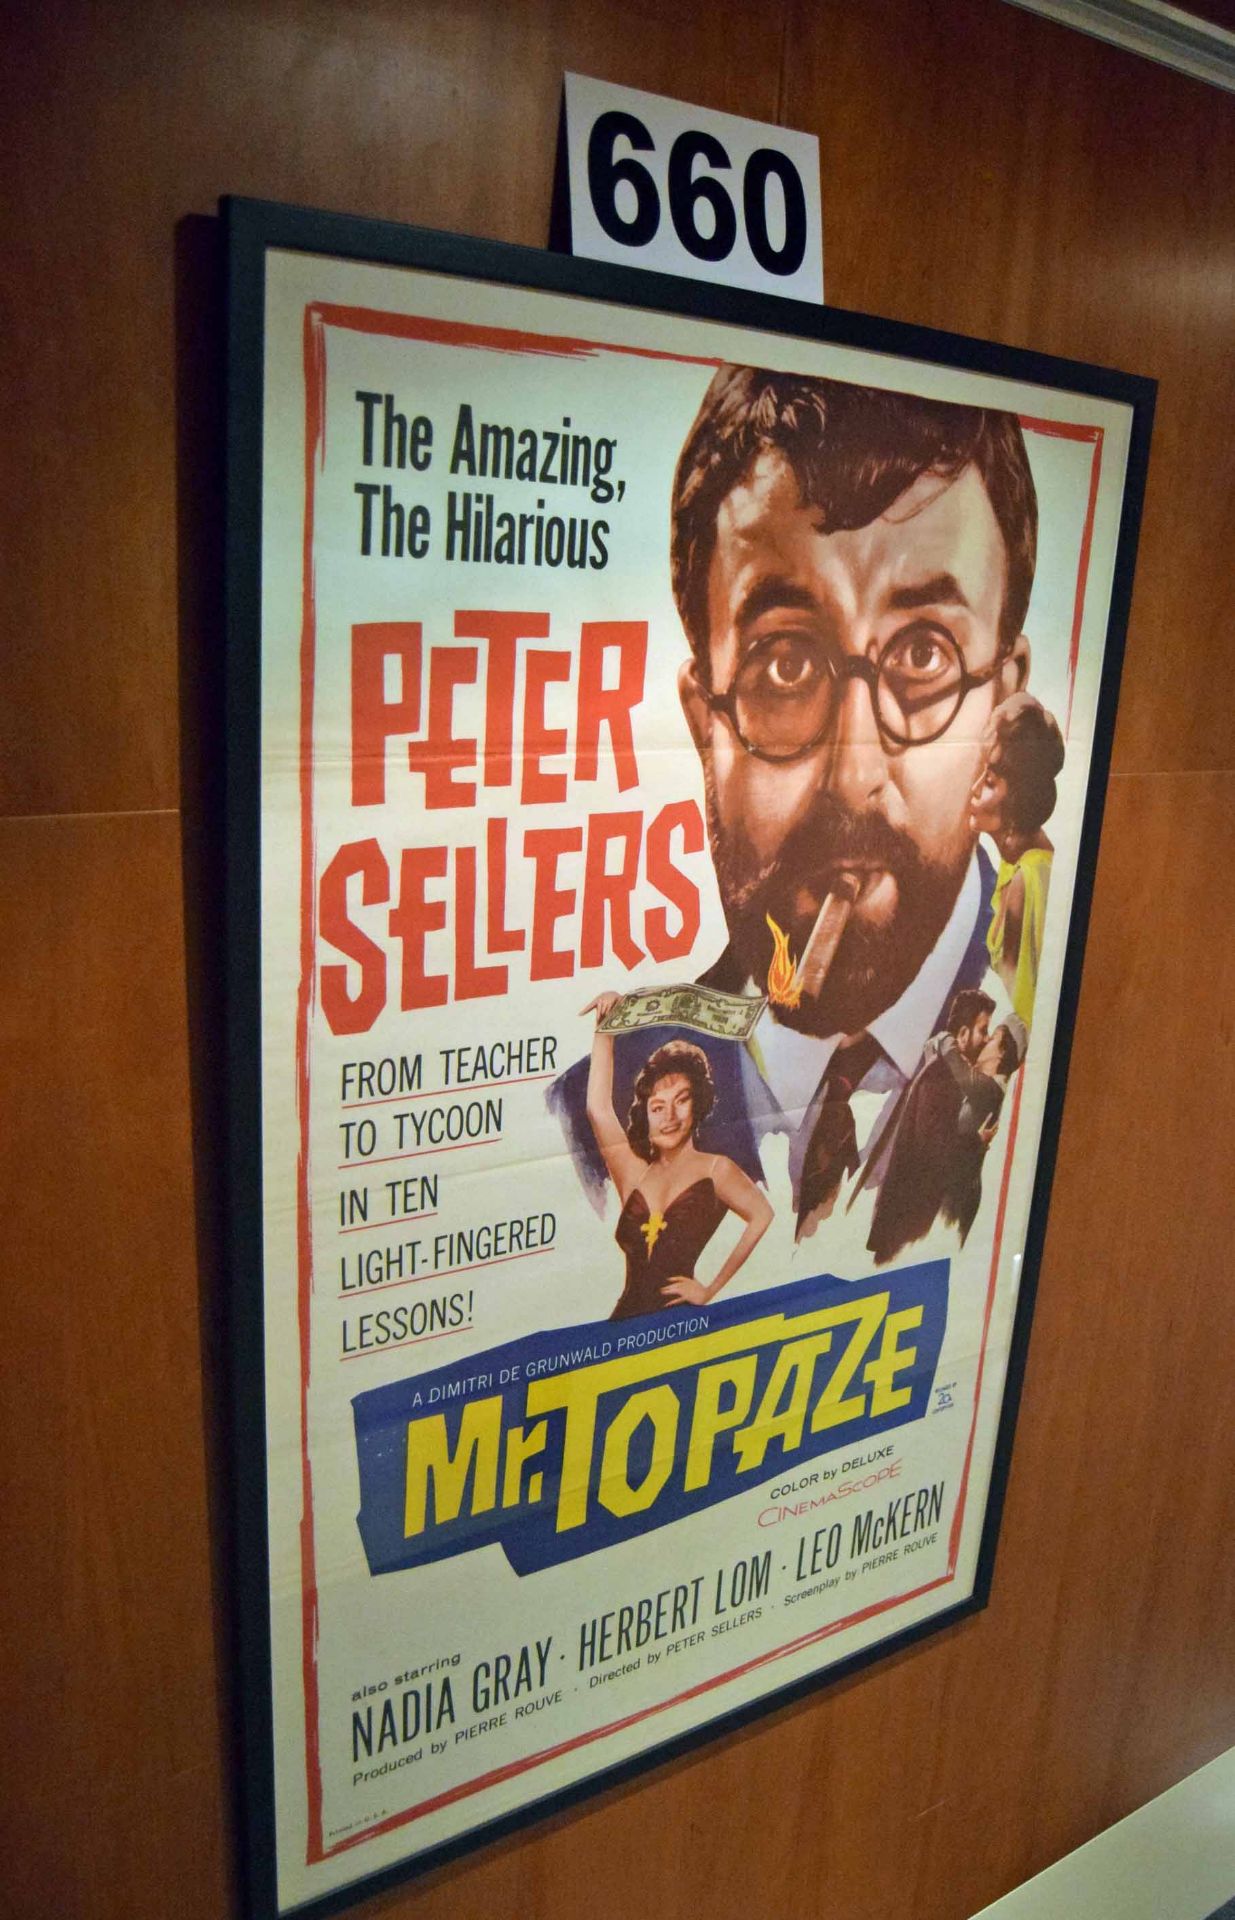 A 720mm x 1070mm Wall mounted Framed and Glazed Promotional Poster Advertising the Movie 'Mr.